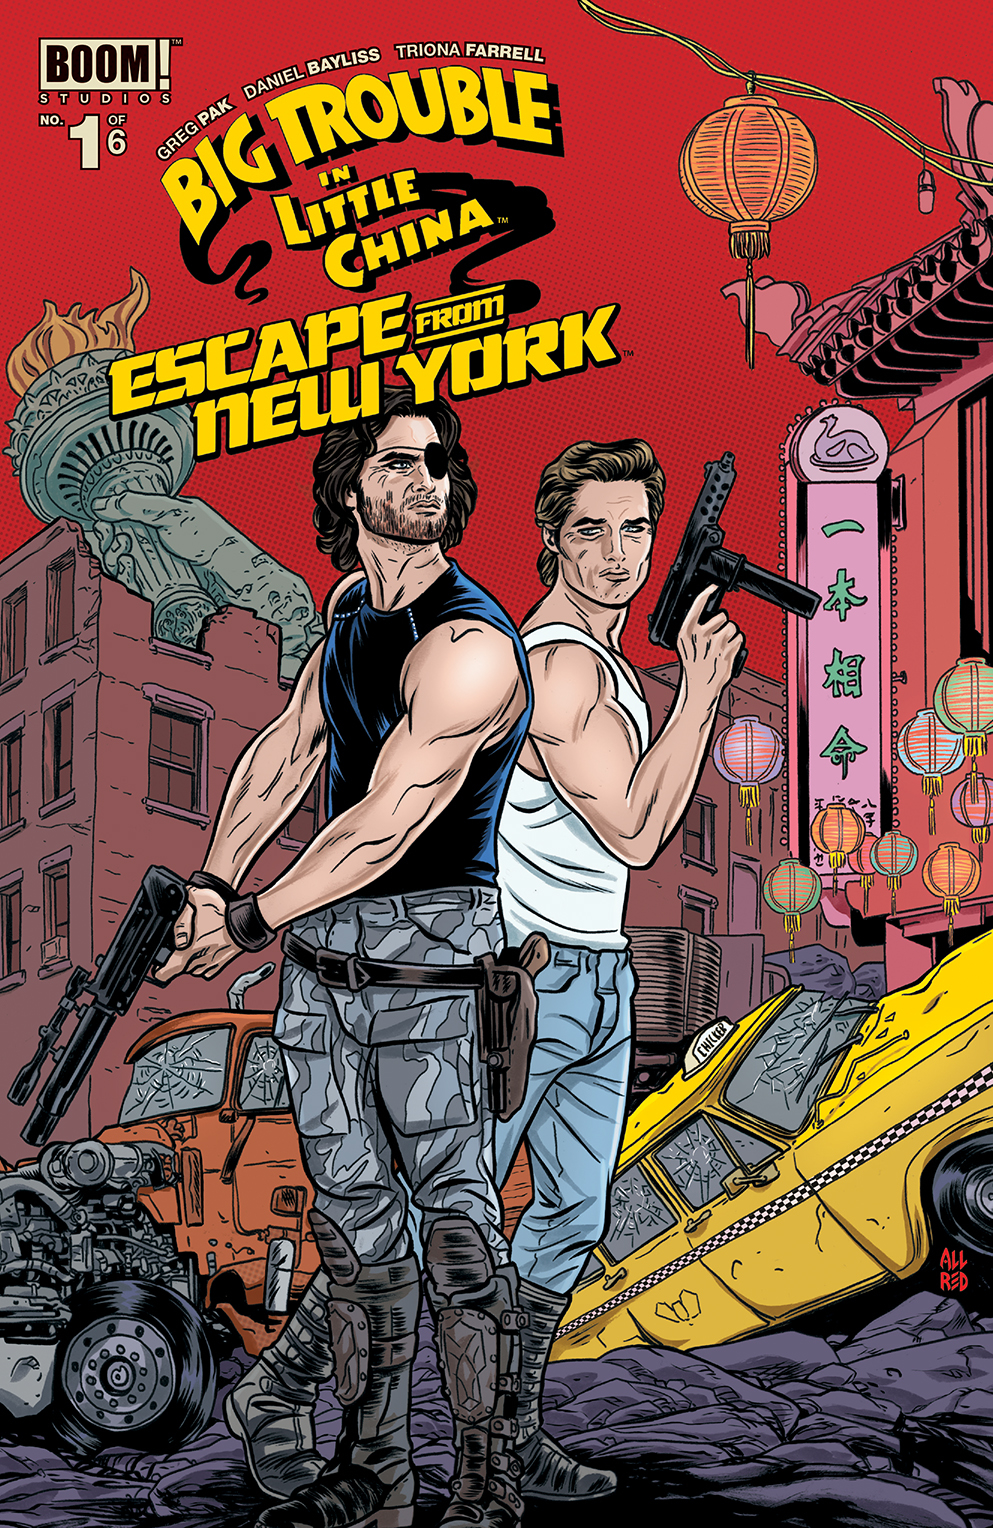 BIG TROUBLE LITTLE CHINA ESCAPE NEW YORK #1 SUBSCRIP ALLRED